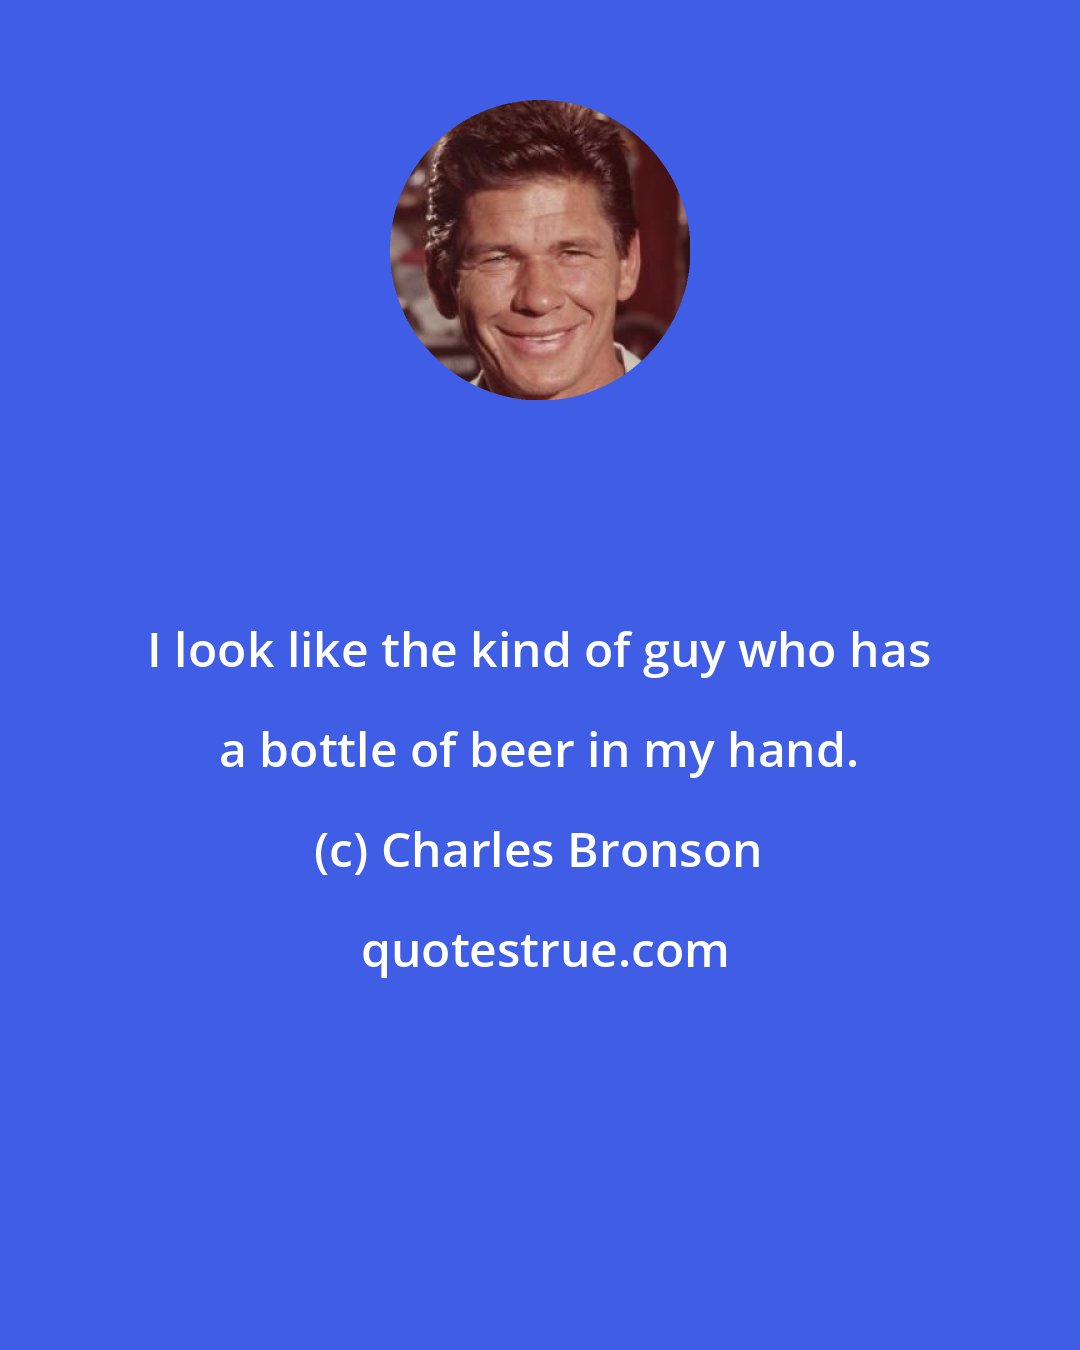 Charles Bronson: I look like the kind of guy who has a bottle of beer in my hand.